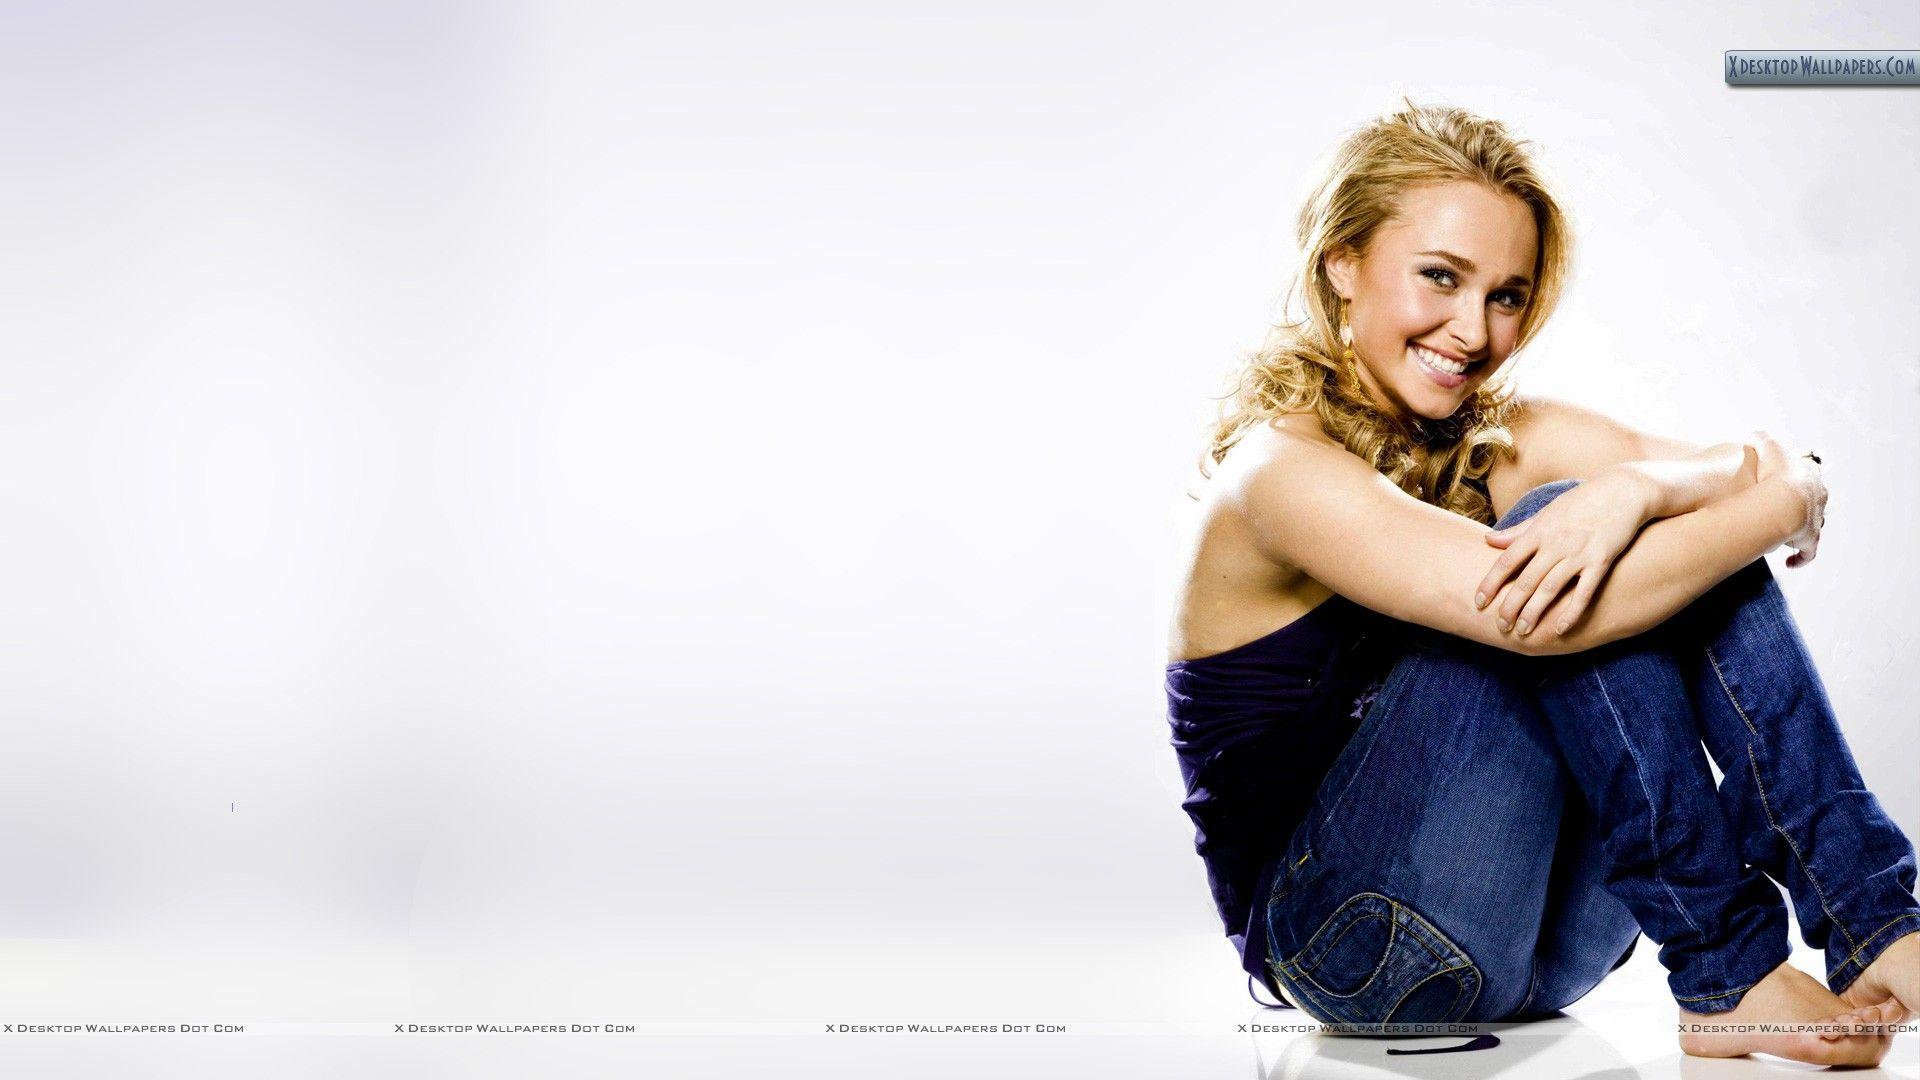 Hayden Panettiere Sitting In Blue Jeans And Top Wallpaper